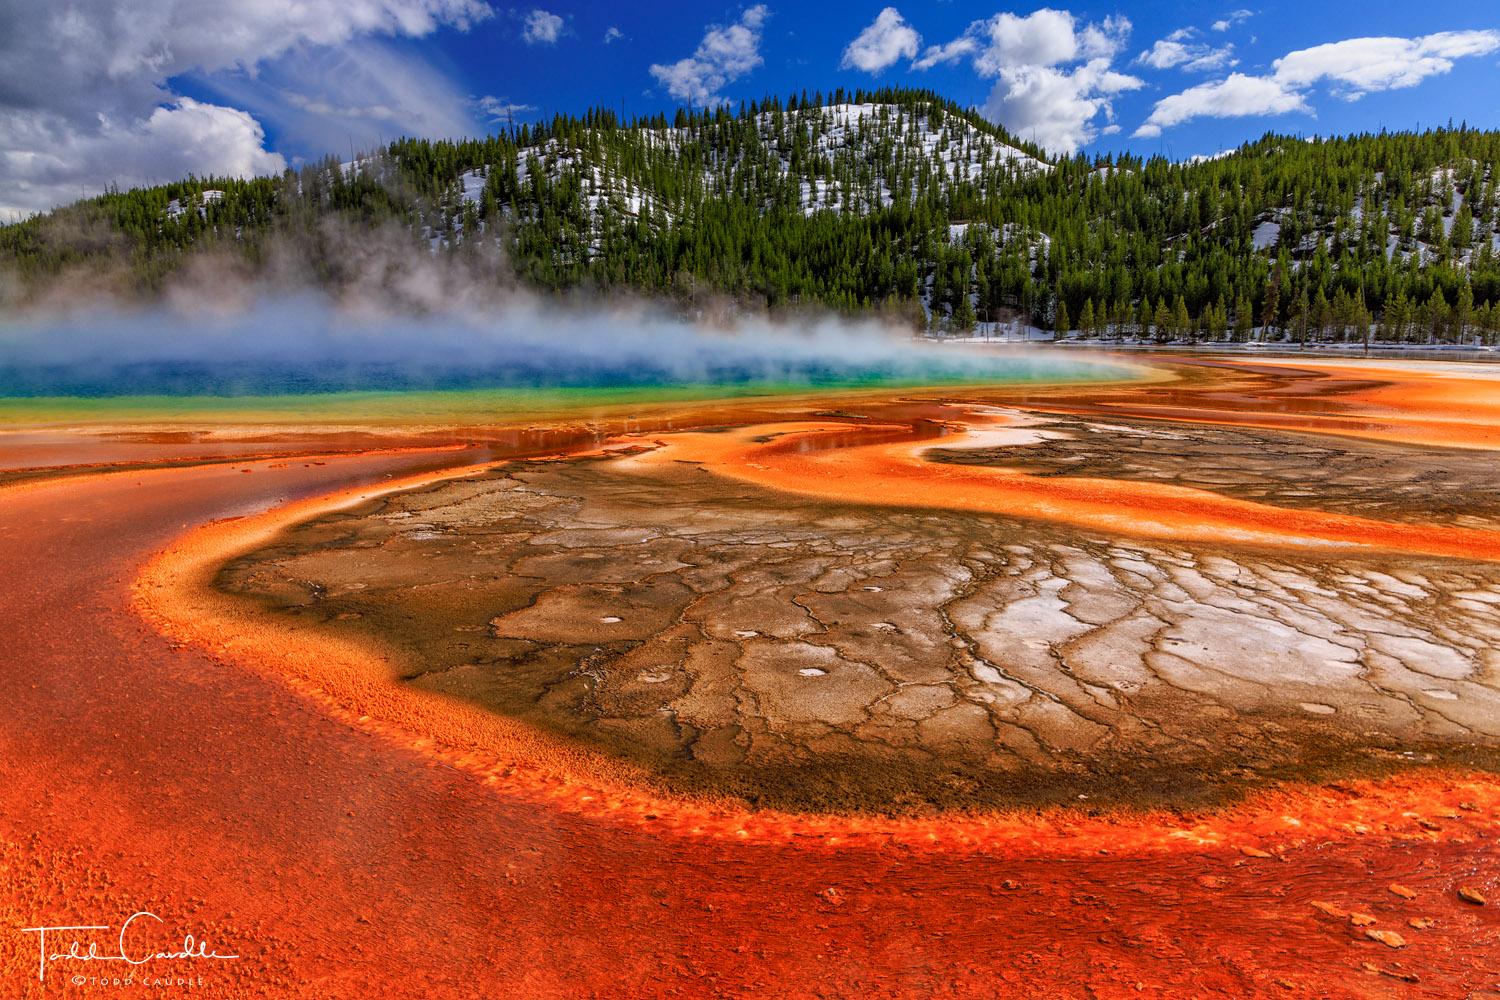 The colorful thermal features of Middle Geyser Basin include Yellowstone's most colorful feature, the Grand Prismatic spring...